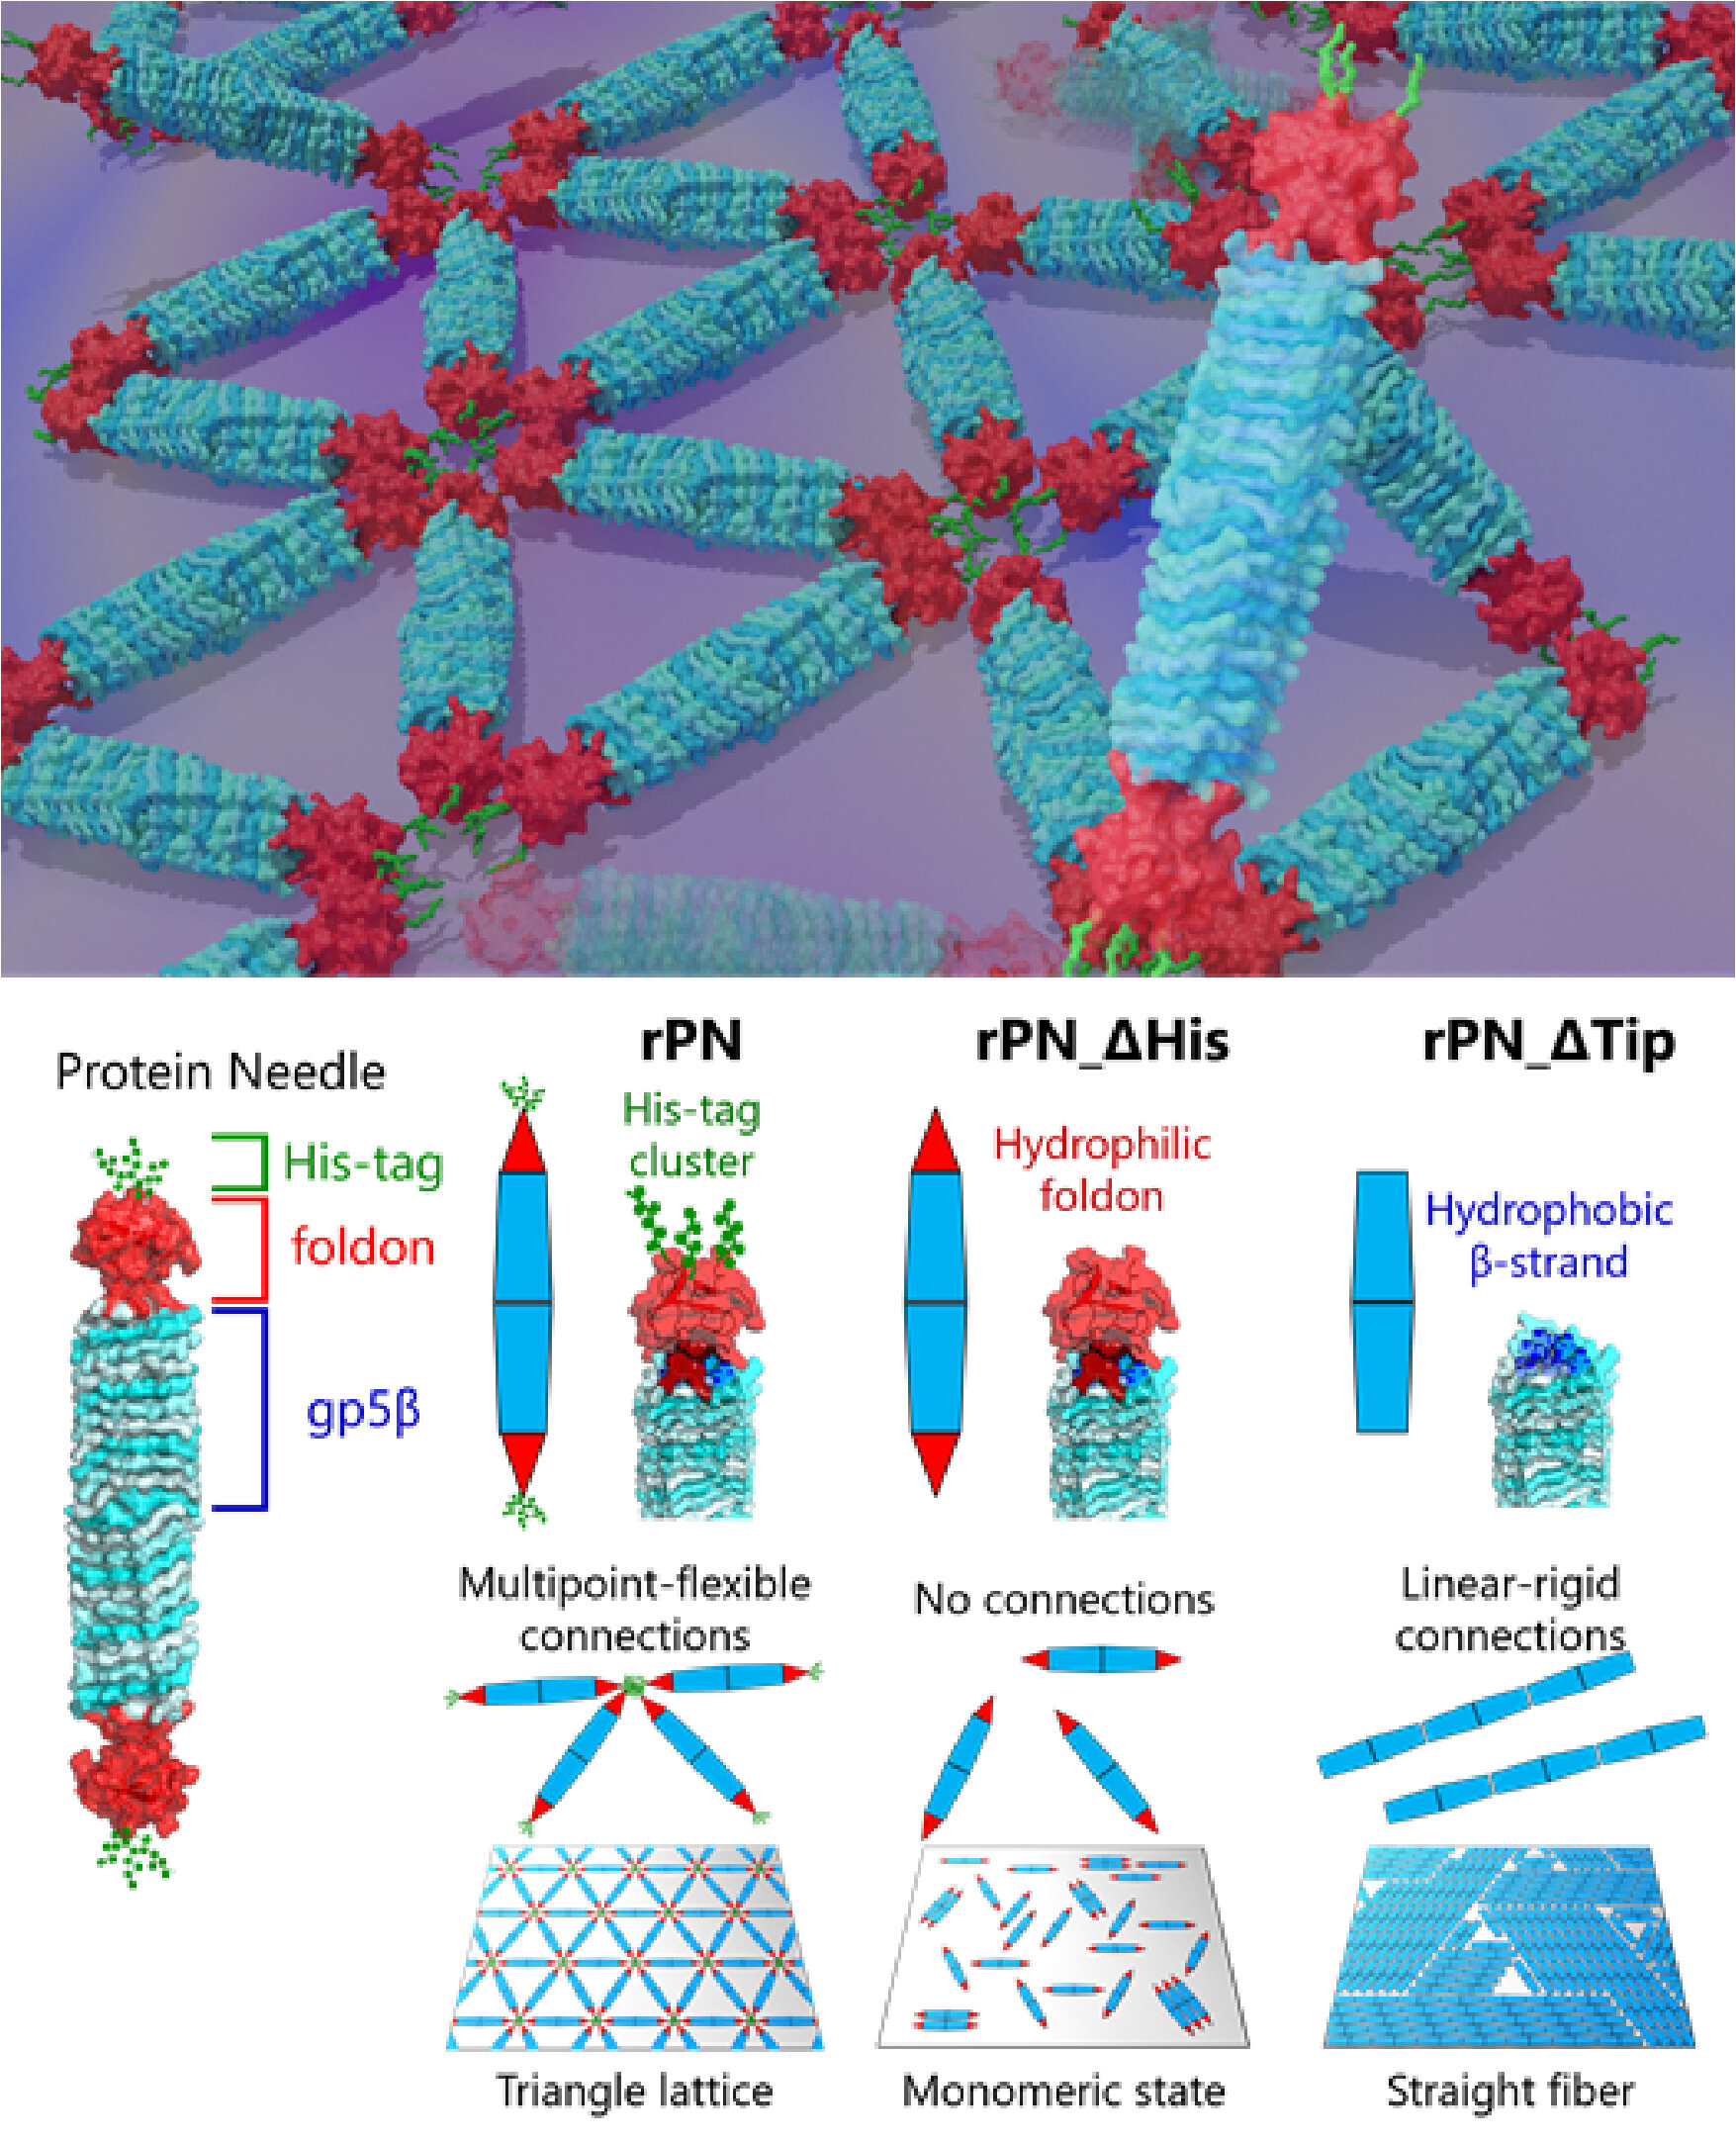 Decoding protein meeting dynamics with synthetic protein needles